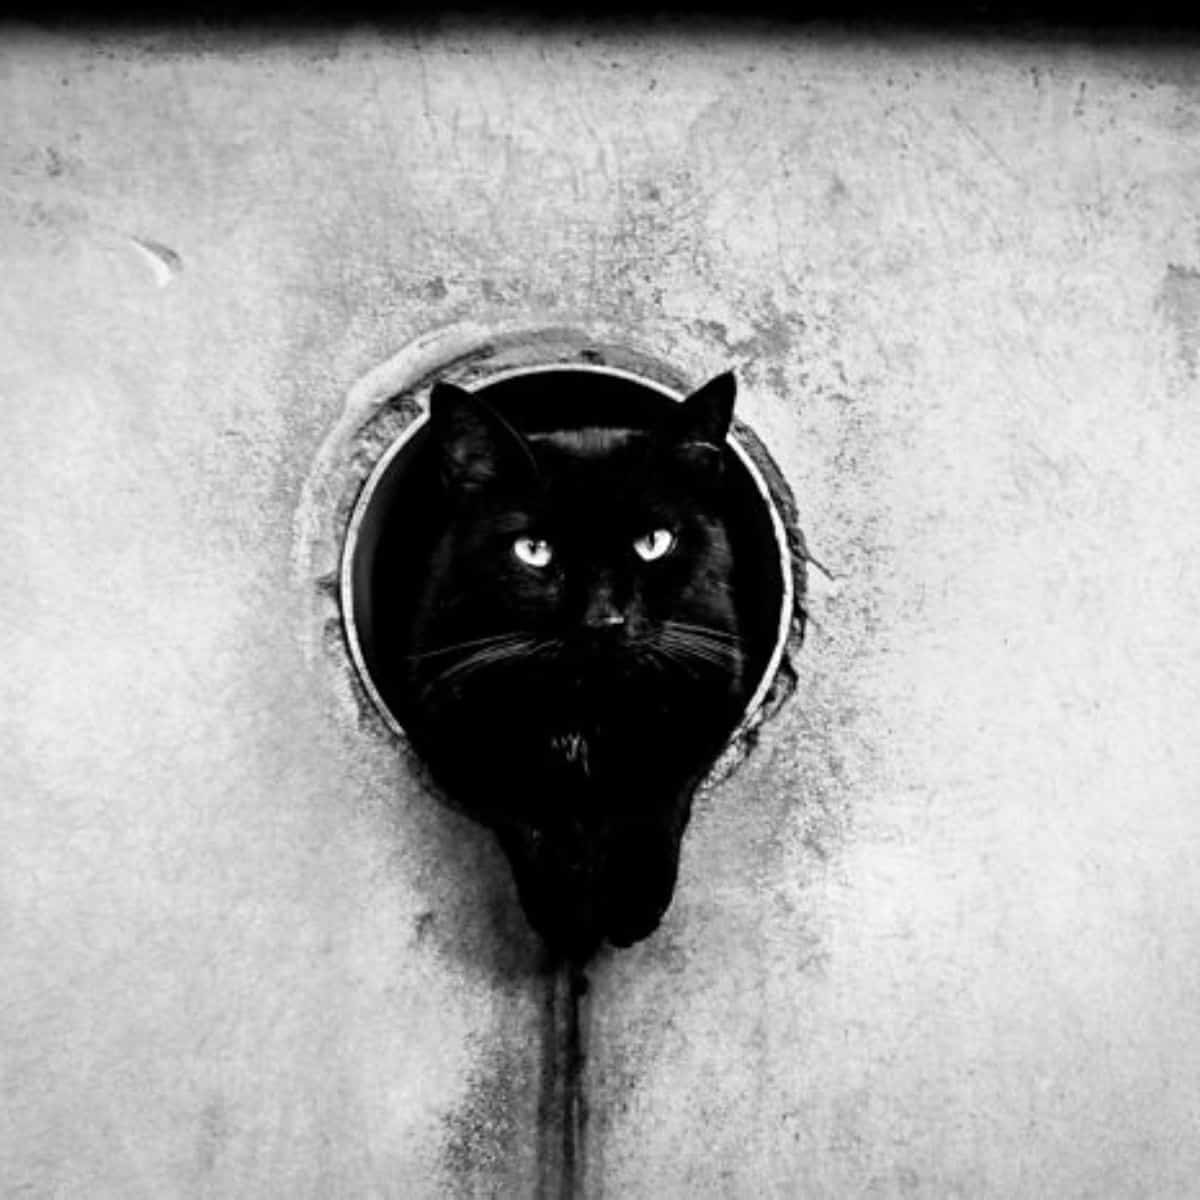 a black cat leaning against a pipe